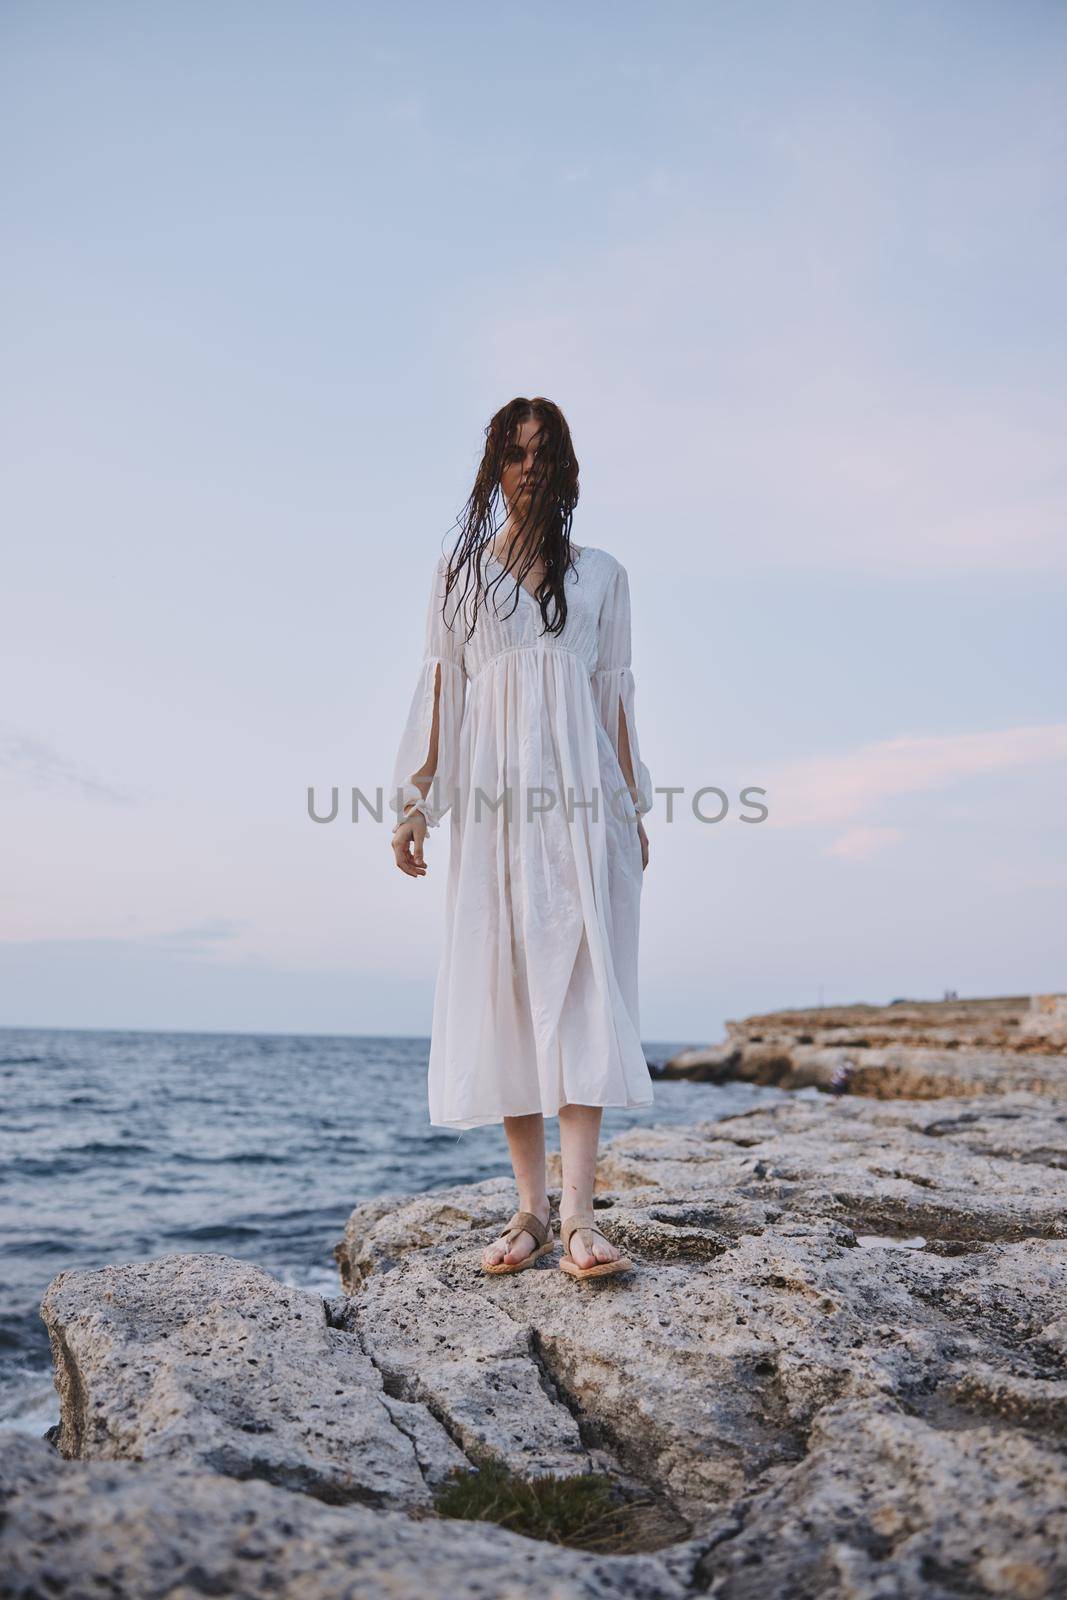 Woman in white dress rocks ocean nature freedom unaltered. High quality photo